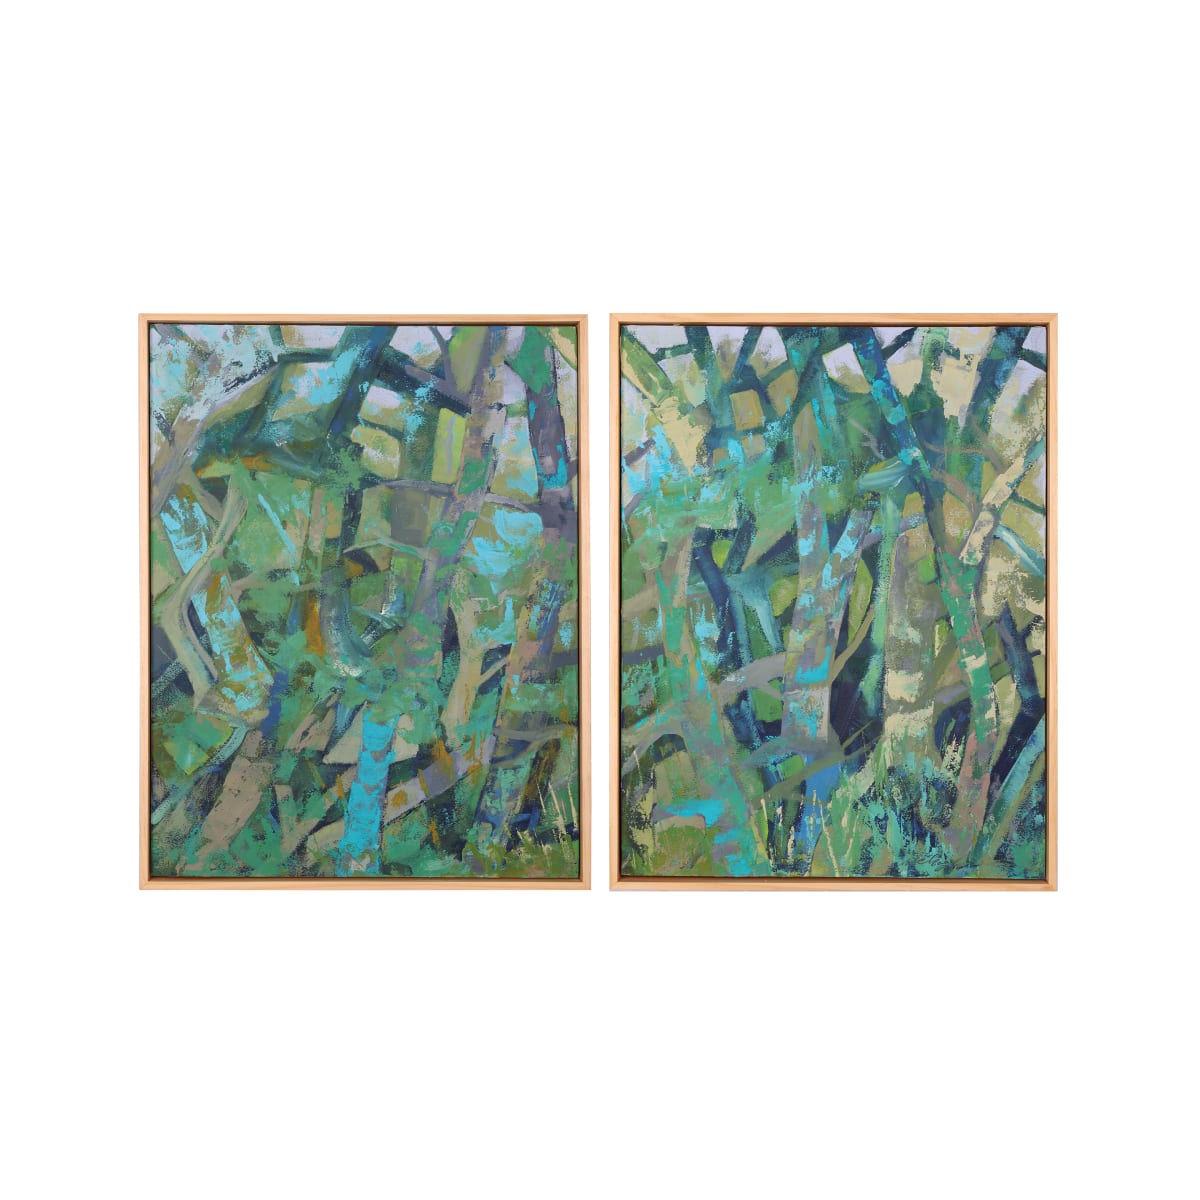 "Thicket"  Image: Original mixed media abstract oil painting by Stevenjohn McHugh titled "Thicket" diptych. Each panel measures 19.5" x 15" x 1.5. Framed size is 20.25" x 15.75 x 2.5". Mixed media with oil stick, marker, oil, graphite, charcoal and cold wax on Arches oil paper glued on wood panel with PH balance glue. Side of wood cradle (solid wood) is varished natural. Signed on front and back. Framed is a vanished gallery frame solid wood. Shipping included in the U.S. Shop at www.stevemchughart.com #madelineisland #stevemchughart.com #bayfieldwi #apostleislands #wisconsinartist #mixedmedia #modernart #contemporaryart #painting #contemporarypainter #paintstudio #artgallery #fineart #abstractart #artcollector #originalart #contemporaryartwork #studio #artgallery #artcollector #artadvisor #artcurator #abstraction #abstractart #abstractpainting #artcollector #artistoninstagram #stevenjohnmchugh #Aninhinabewakilands #artistinthewoods #lakegitchegumee